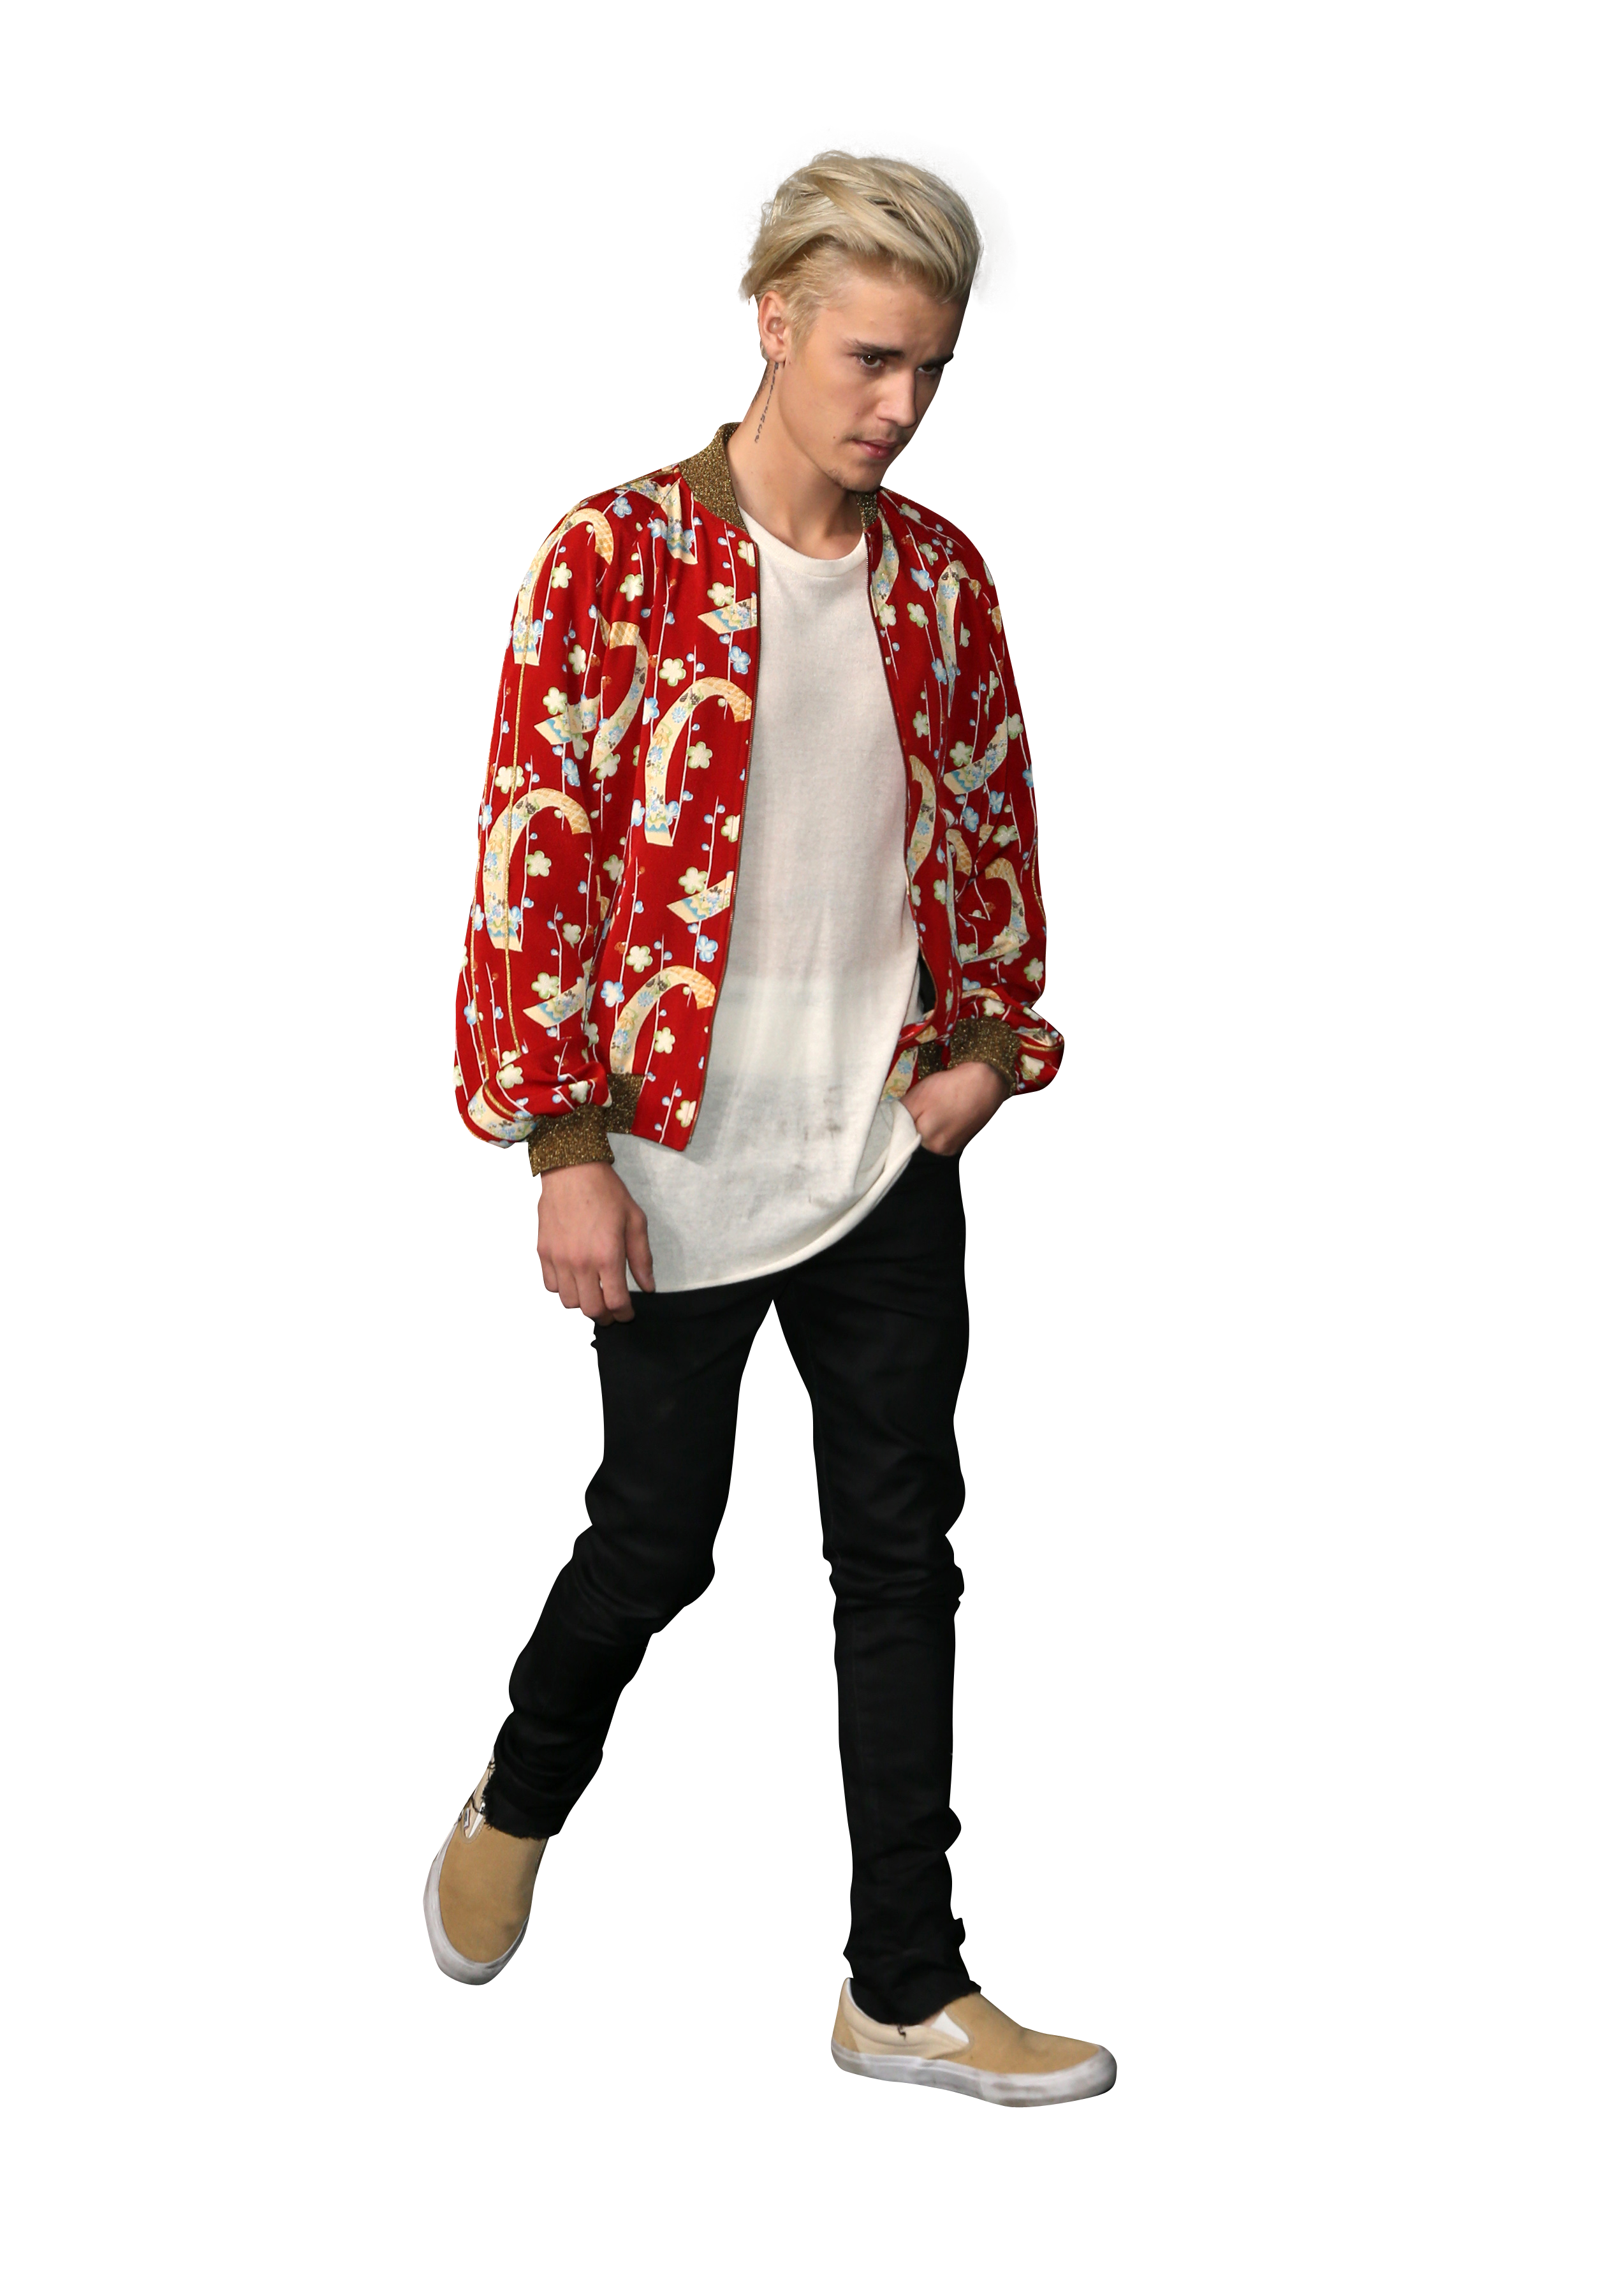 Justin Bieber dressed in a Red Shirt